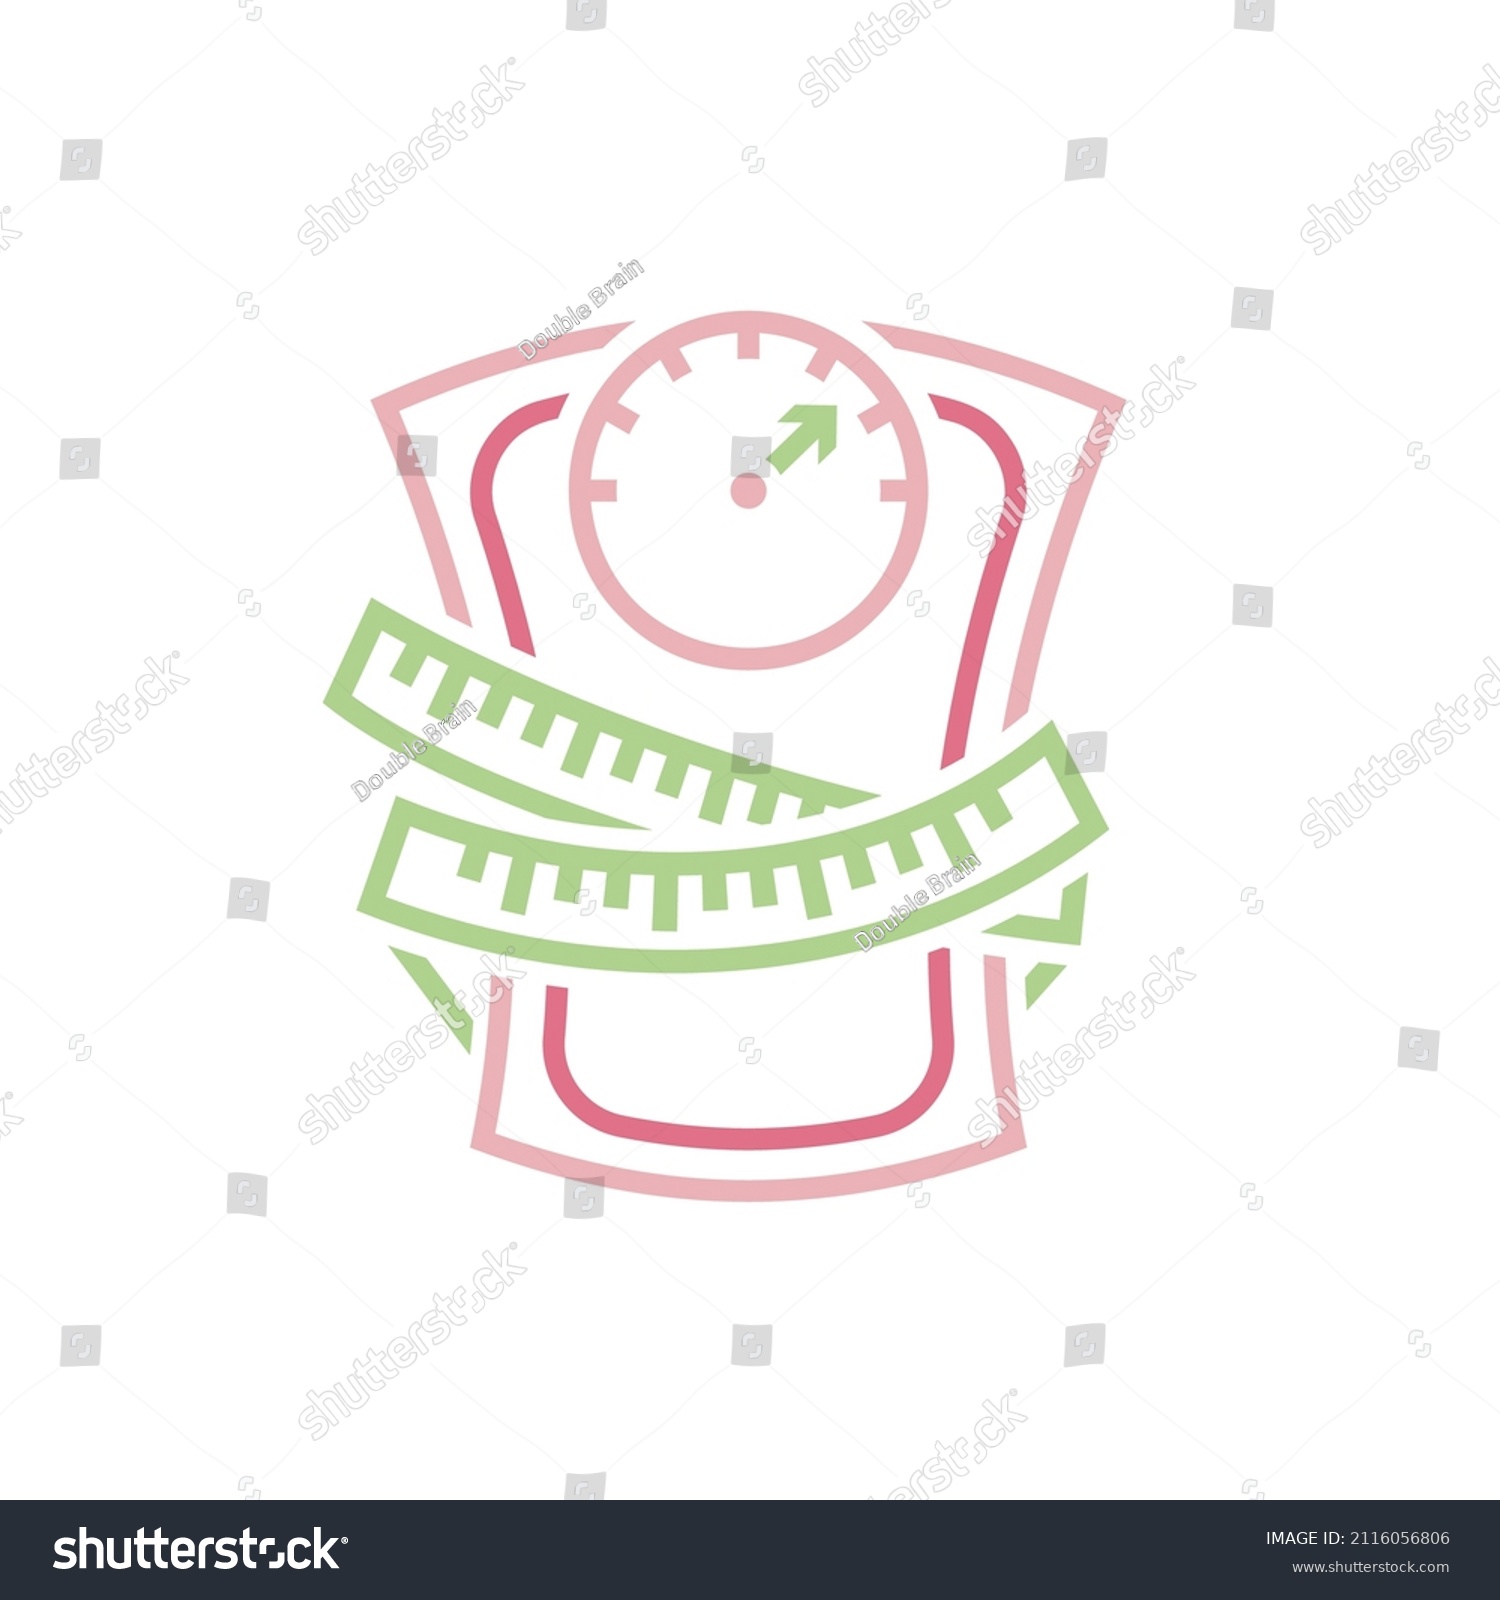 SVG of Weight loss icon, measuring tape wrapped around scales shaped of waist. Slimming, fitness, diet, healthy lifestyle. Vector illustration for sport wellness app, weight control application advertising. svg